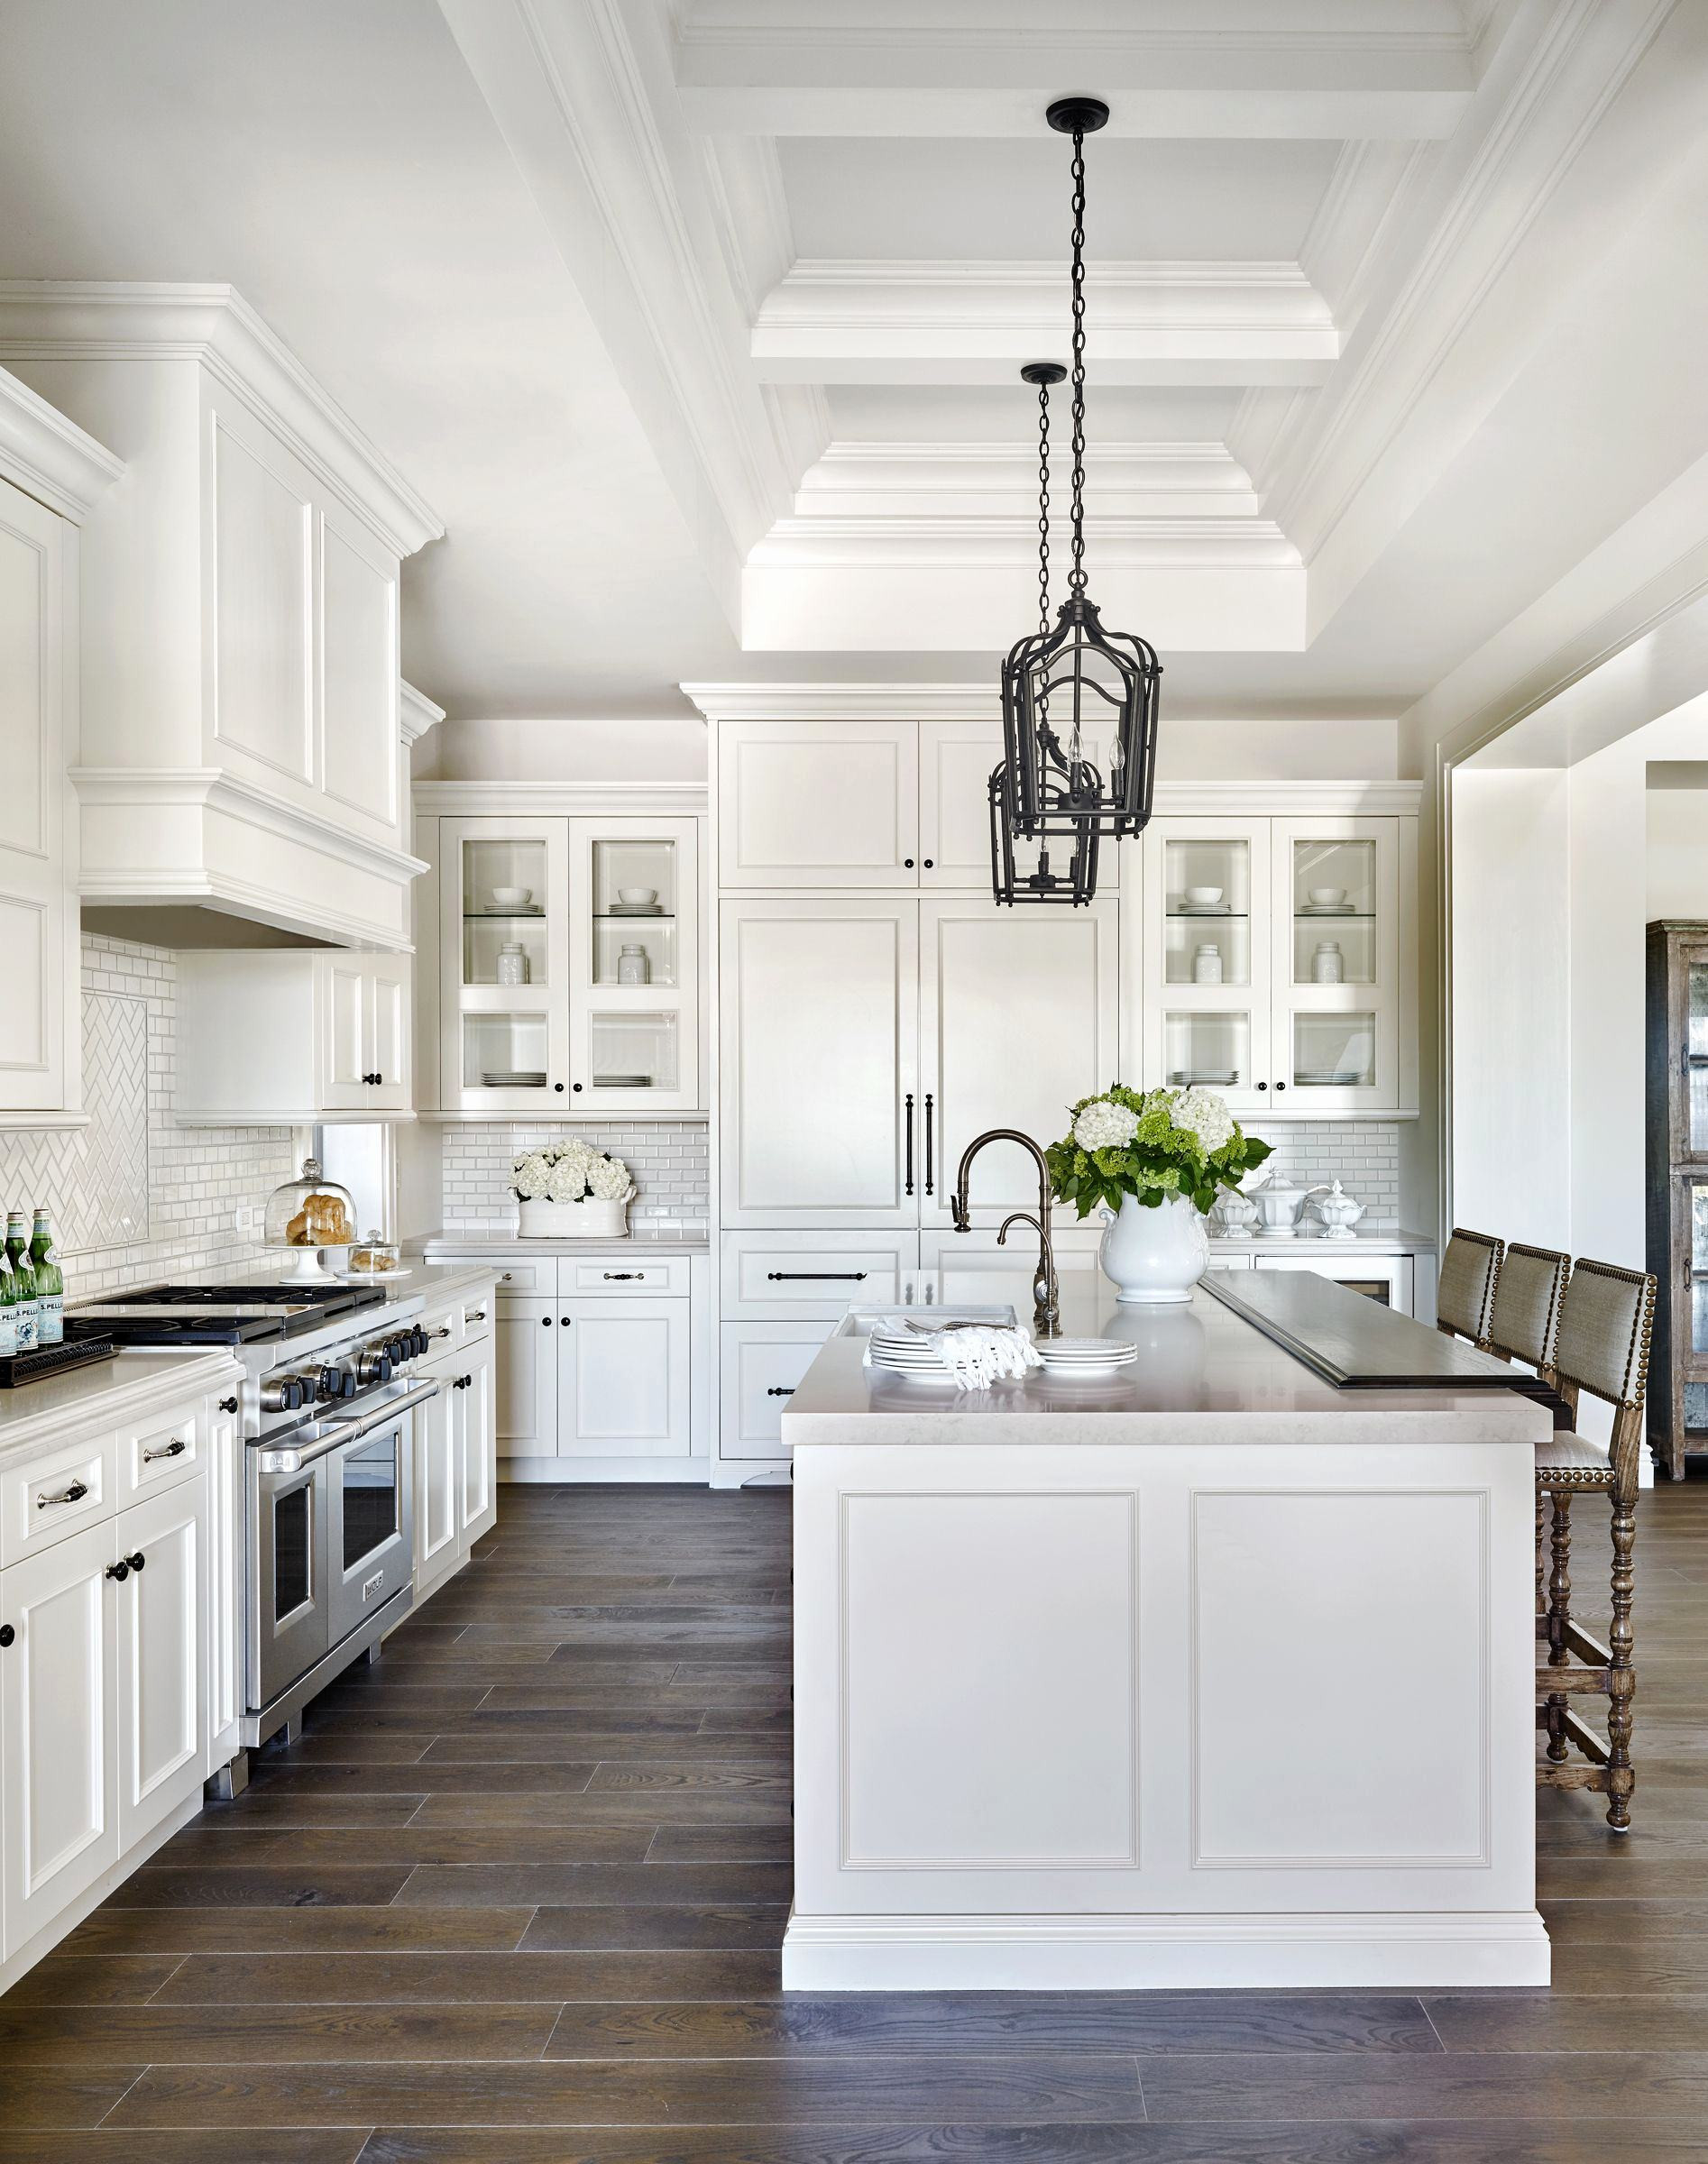 30 Trendy Hardwood Floors with Dark Cabinets 2023 free download hardwood floors with dark cabinets of elegant 32 white kitchen cabinets dark wood floors photos inside white kitchen cabinets dark wood floors new i want this exact layout of island opposite